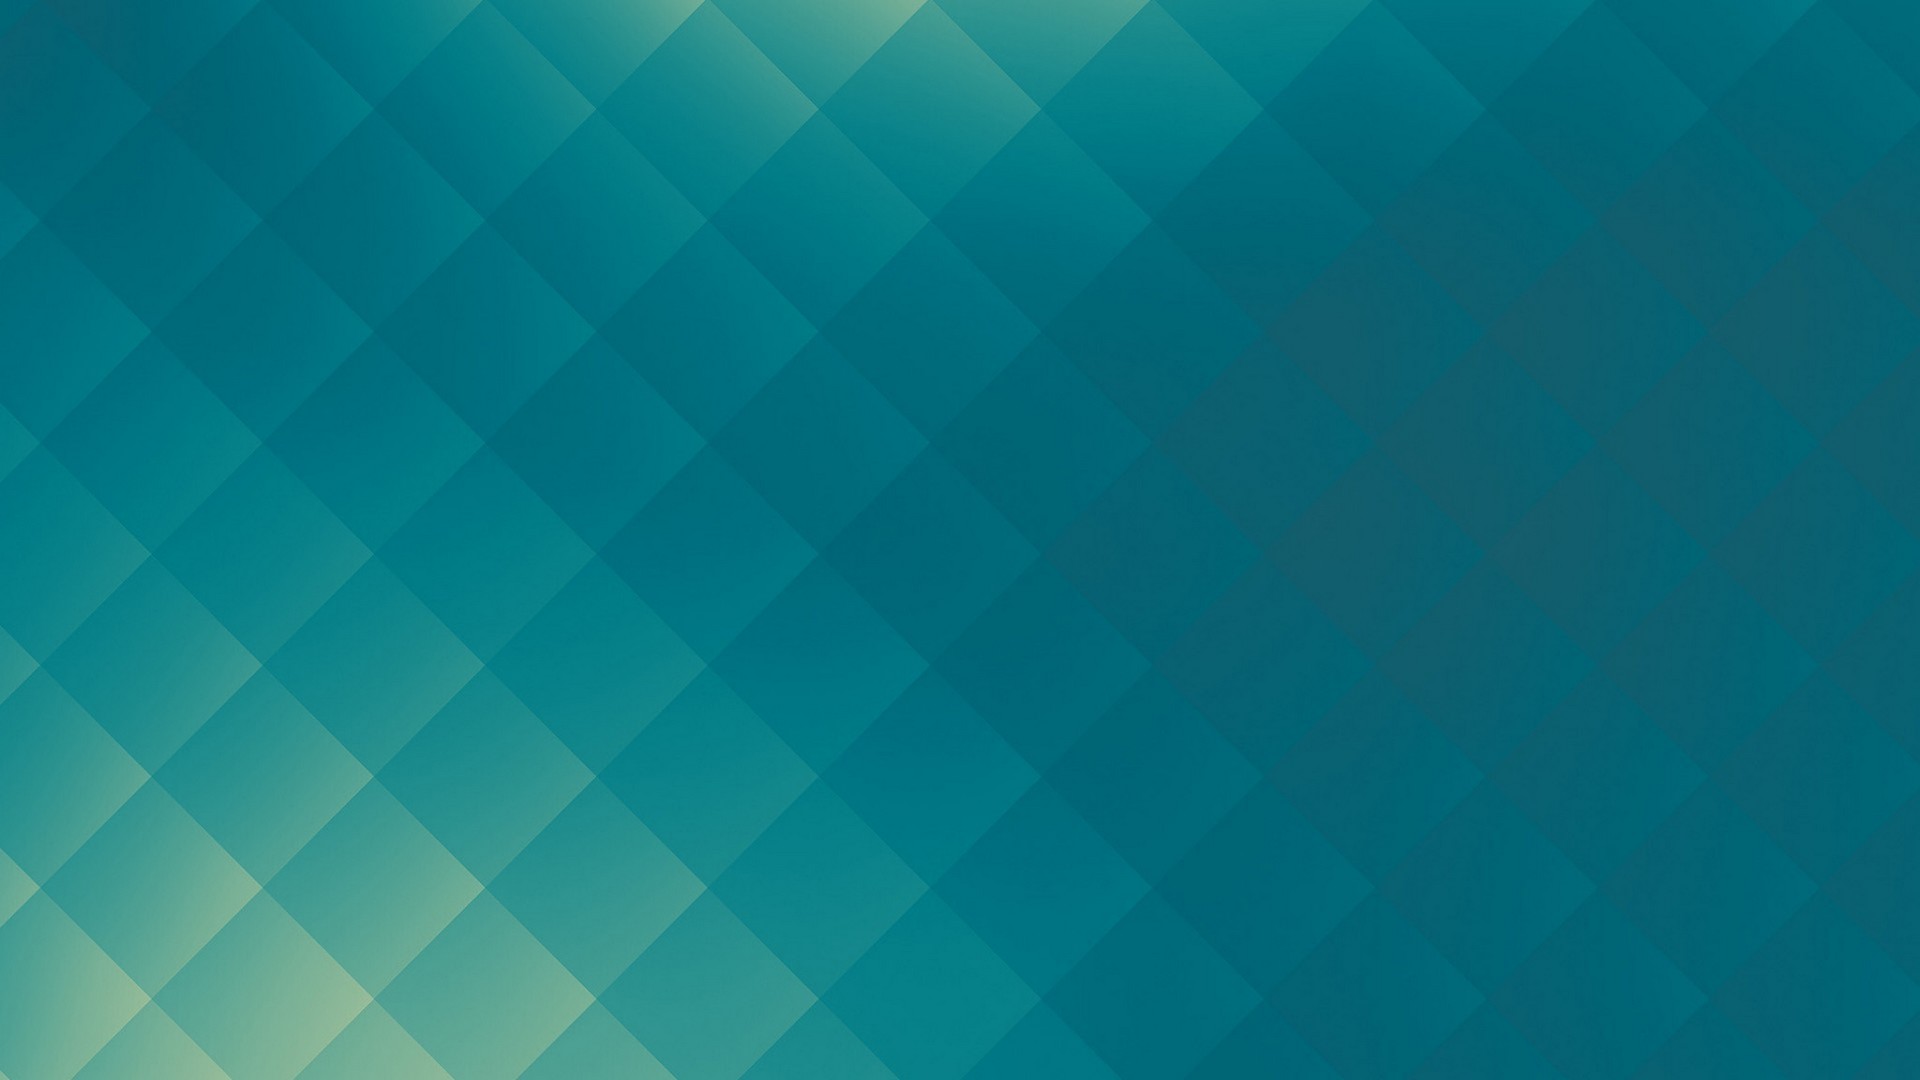 Teal Blue Desktop Backgrounds HD with image resolution 1920x1080 pixel. You can use this wallpaper as background for your desktop Computer Screensavers, Android or iPhone smartphones